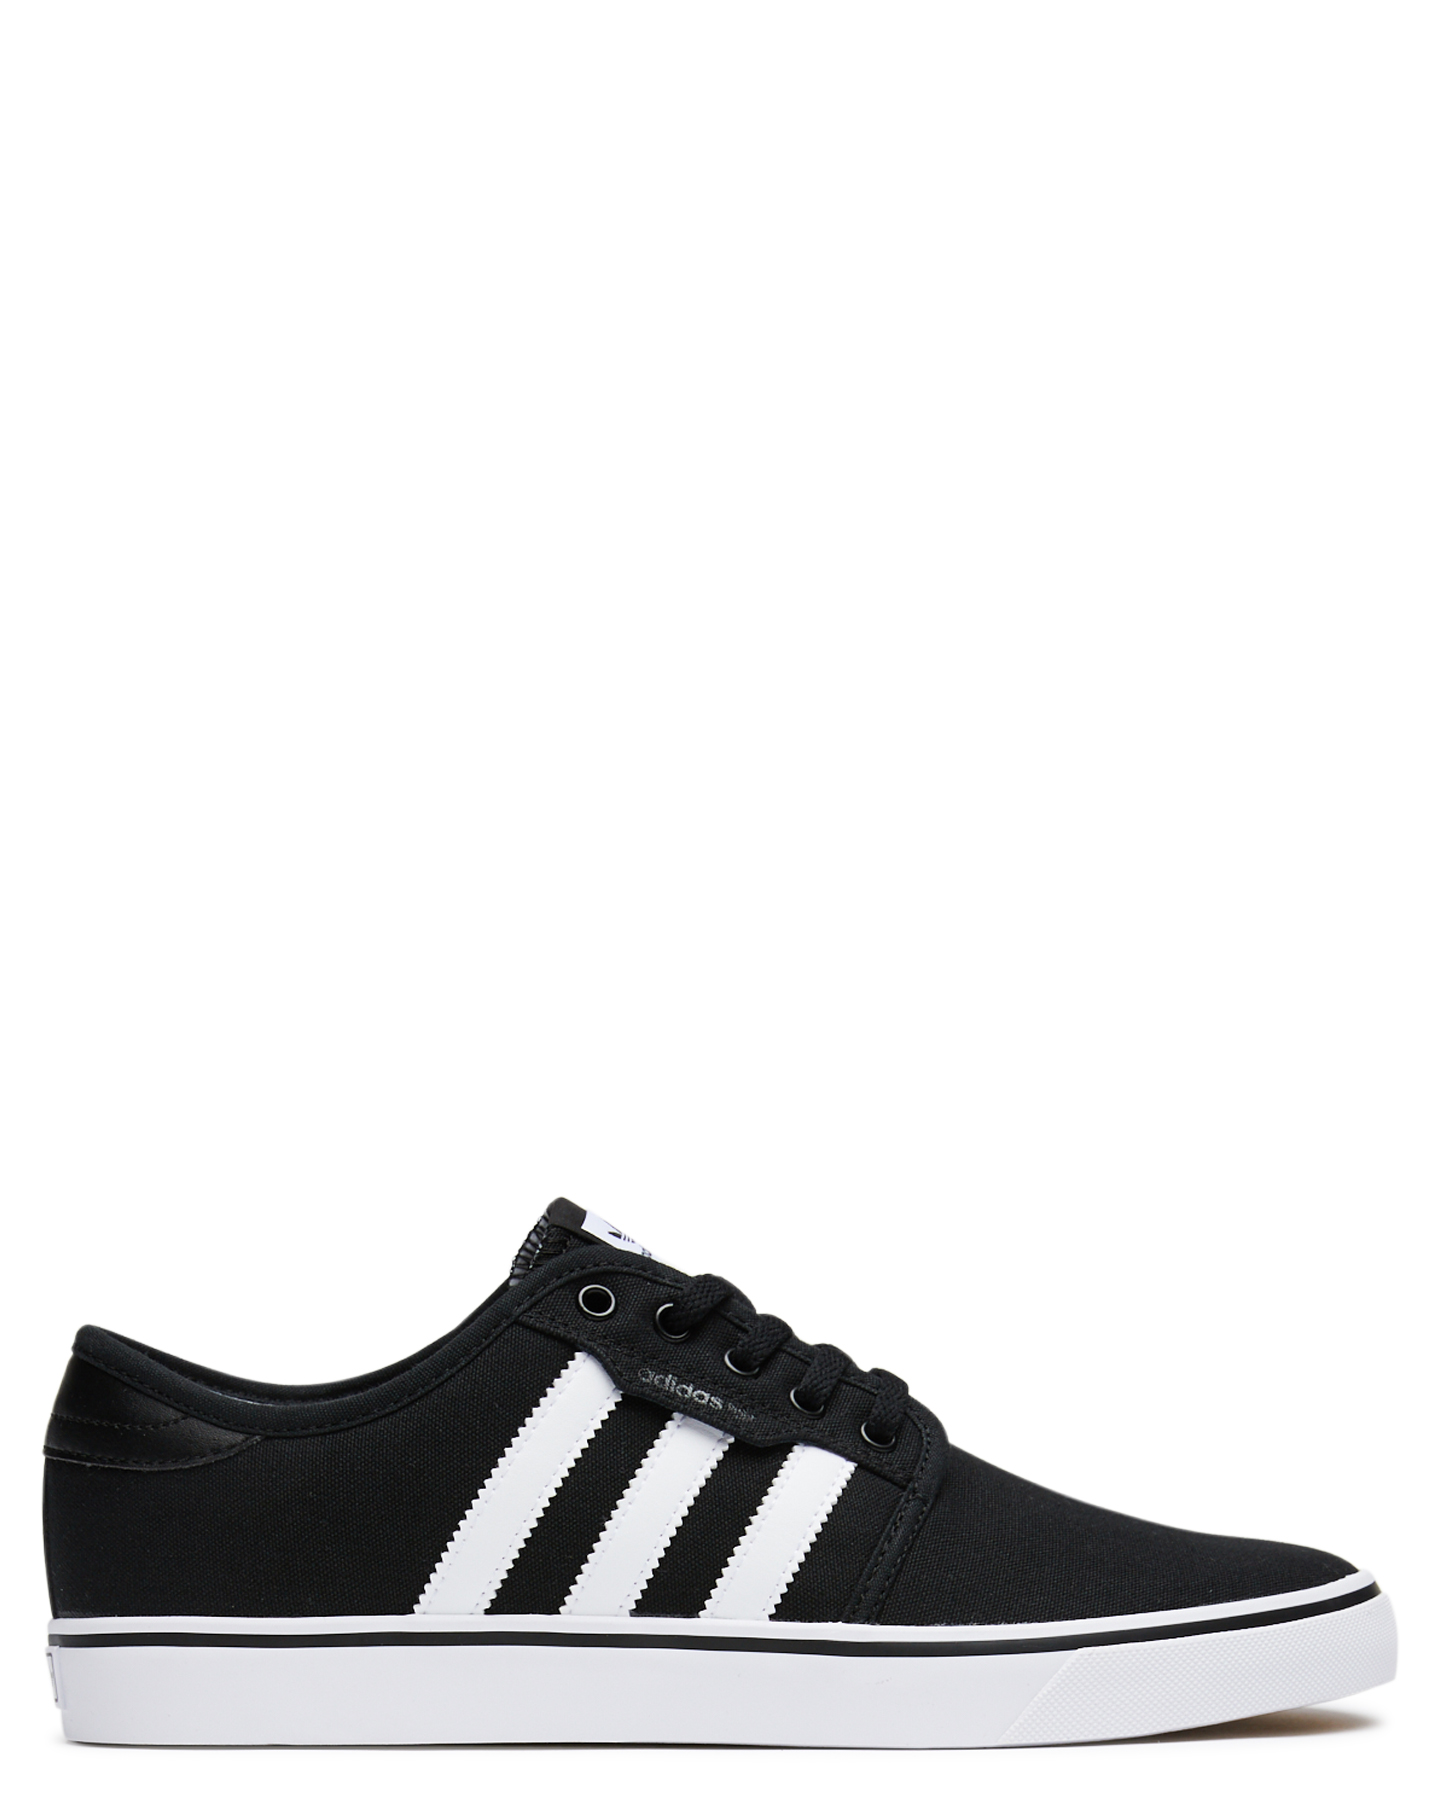 black and white adidas womens sneakers